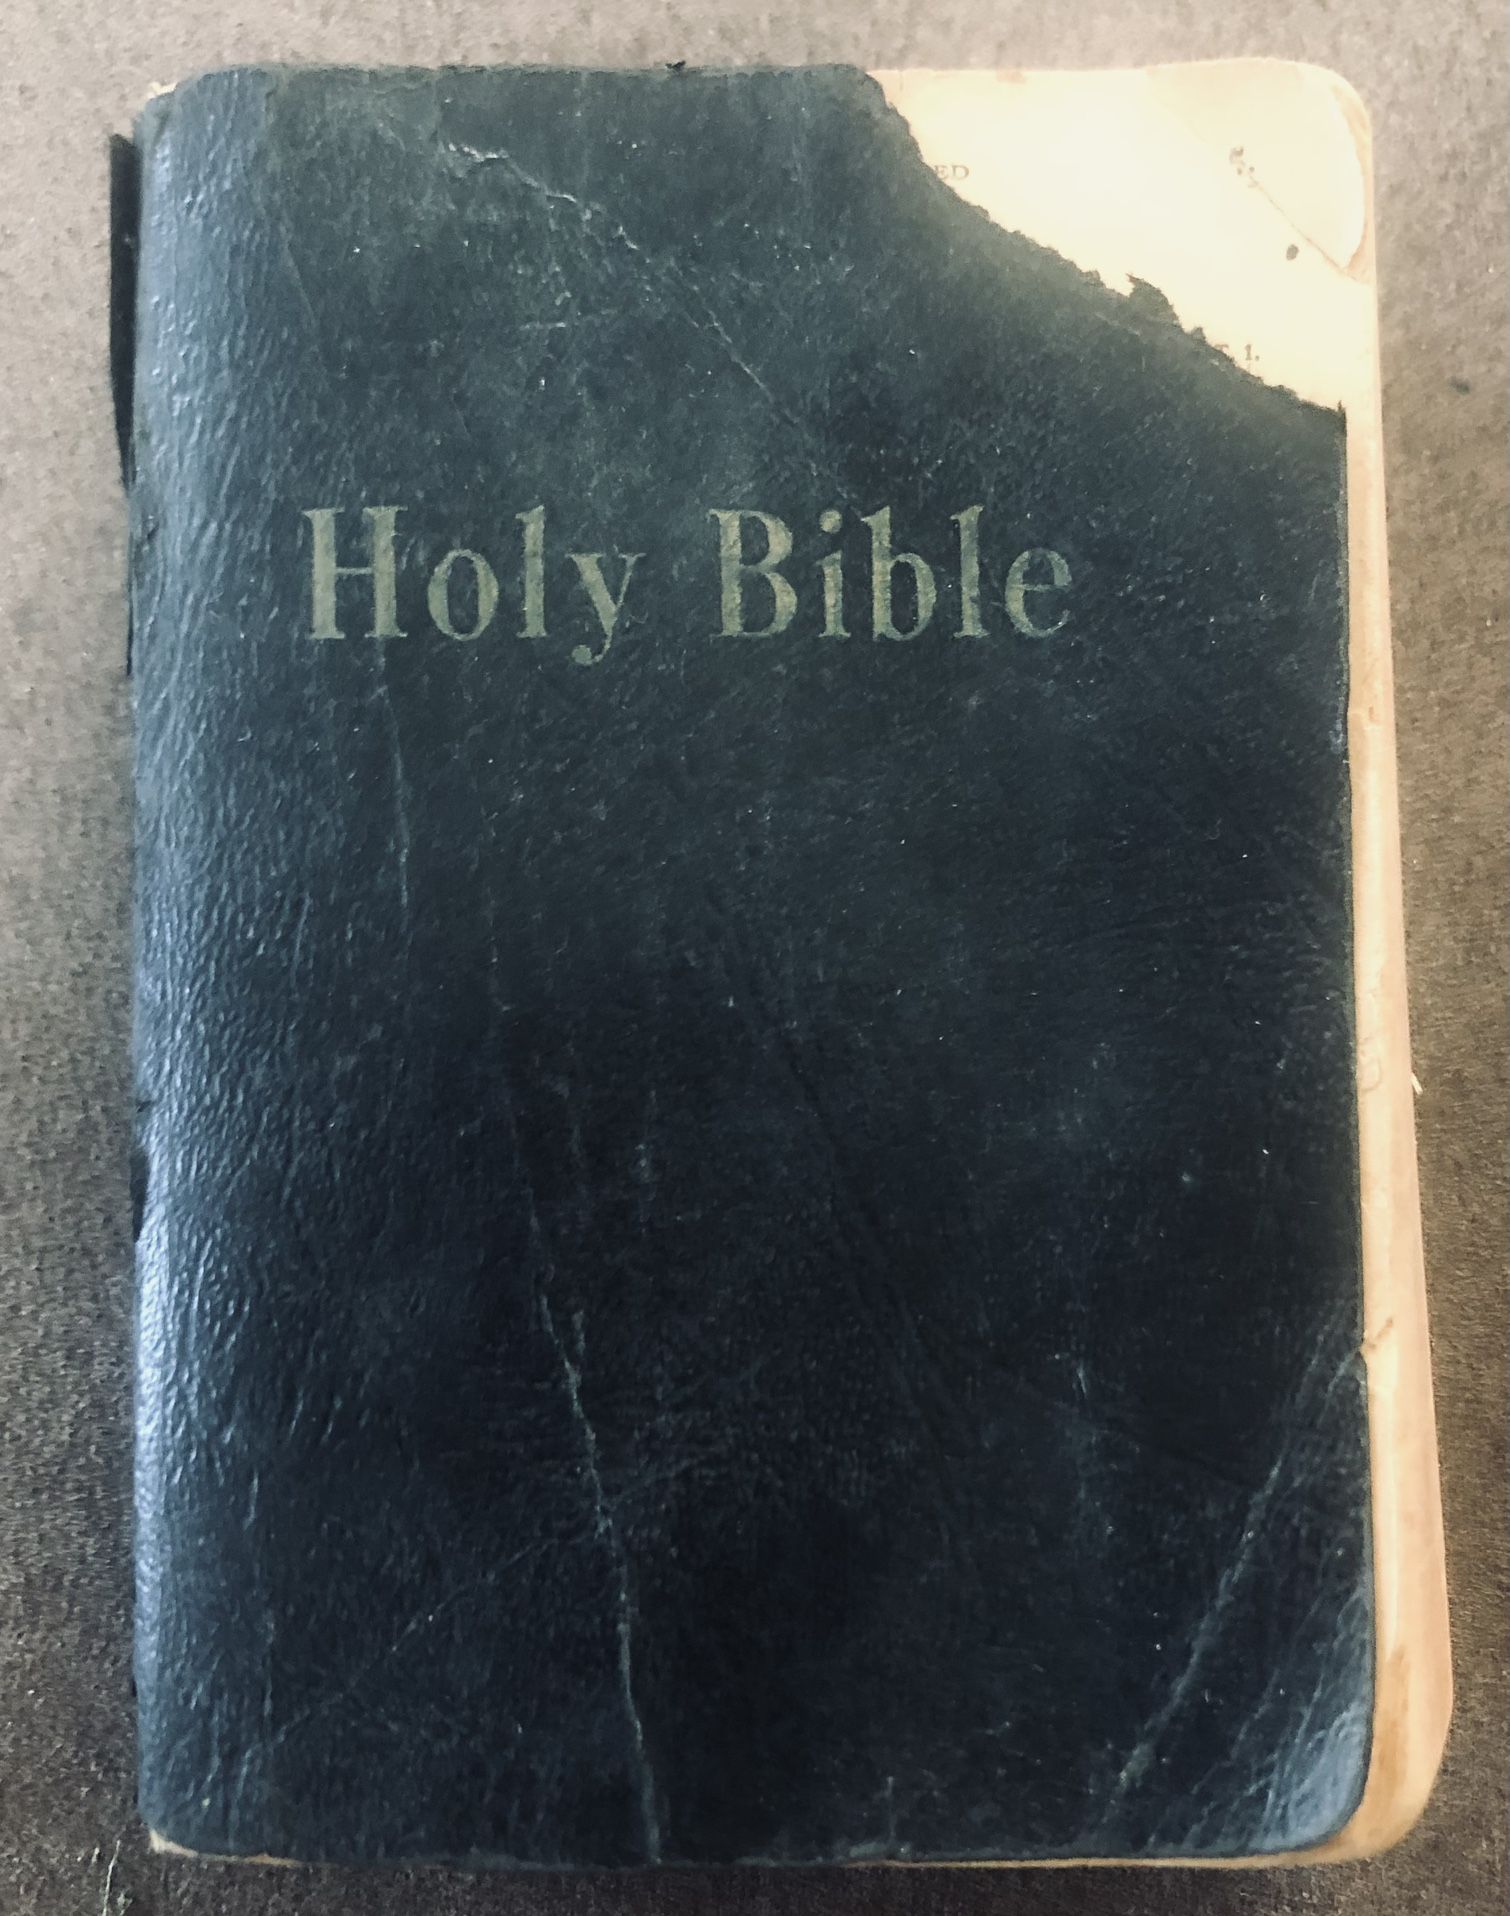 Vintage/Antique Small Holy Bible Book-Missing Some Pages-Fair Condition 